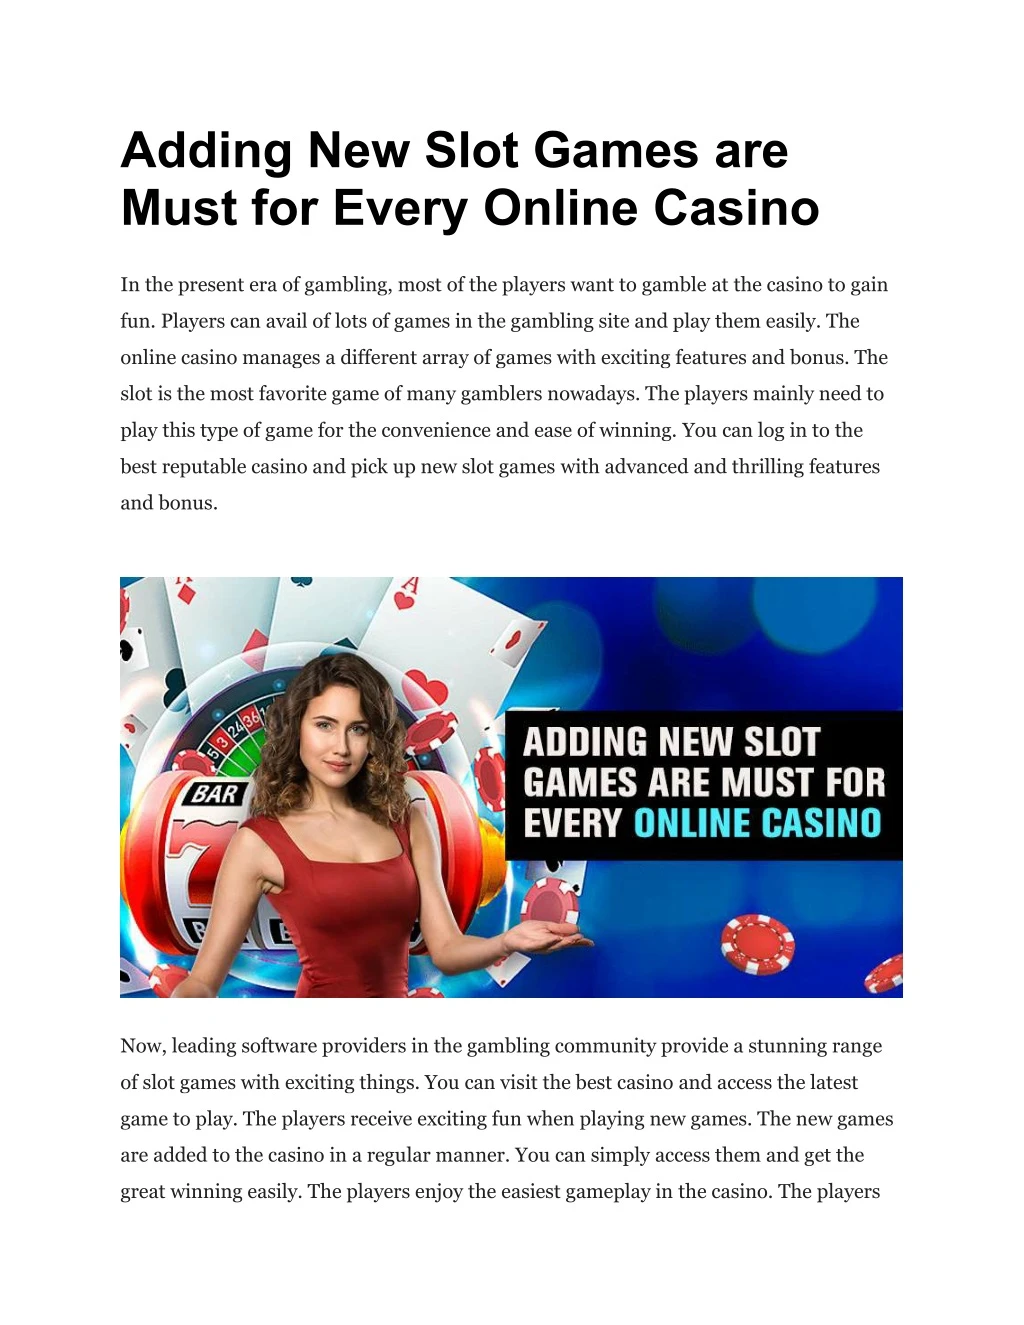 adding new slot games are must for every online